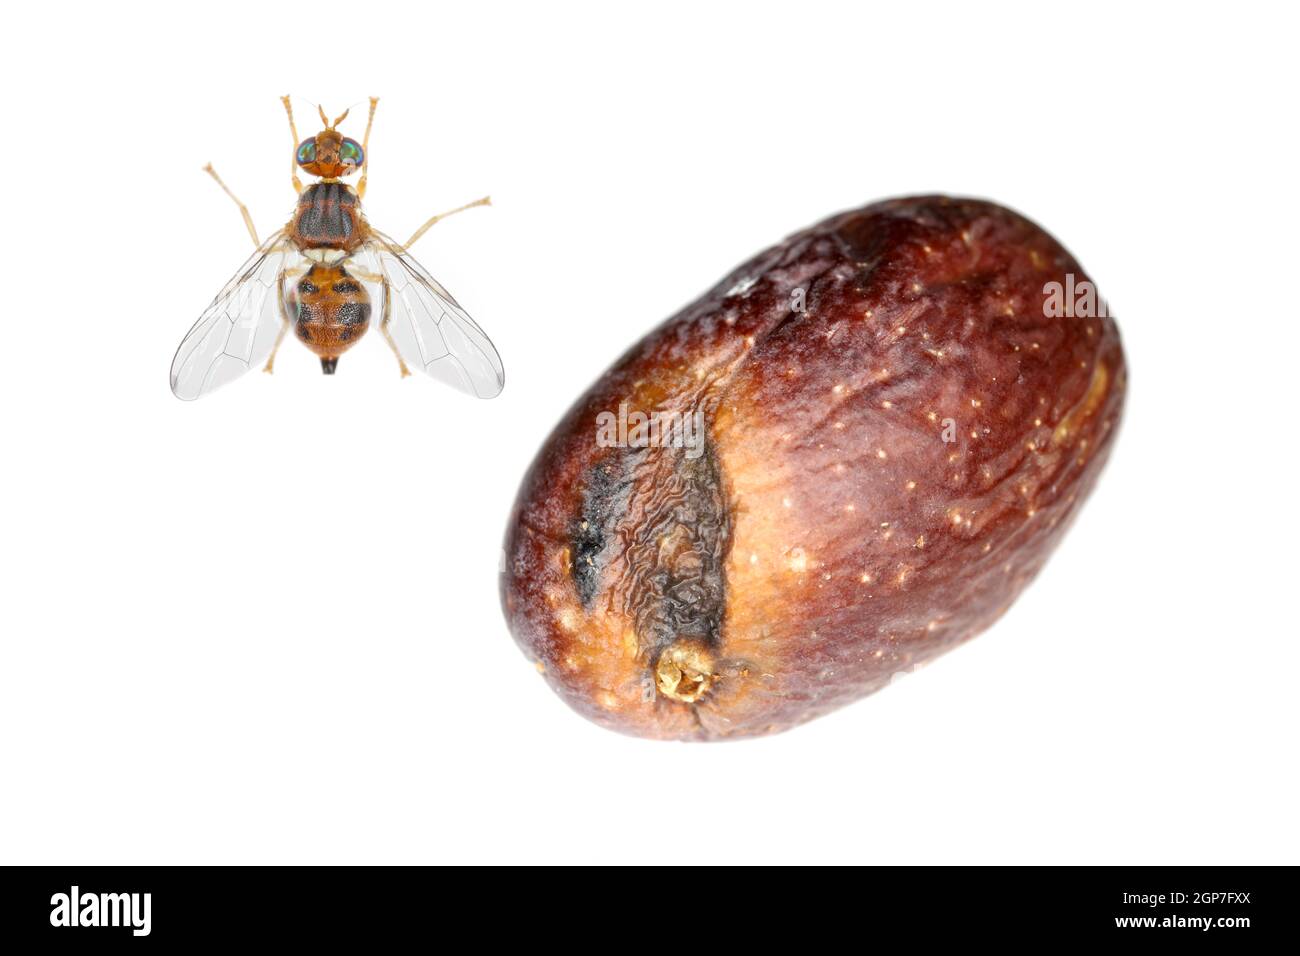 Olive Fruit fly- Bactrocera oleae. One of the most important olive pests. Stock Photo